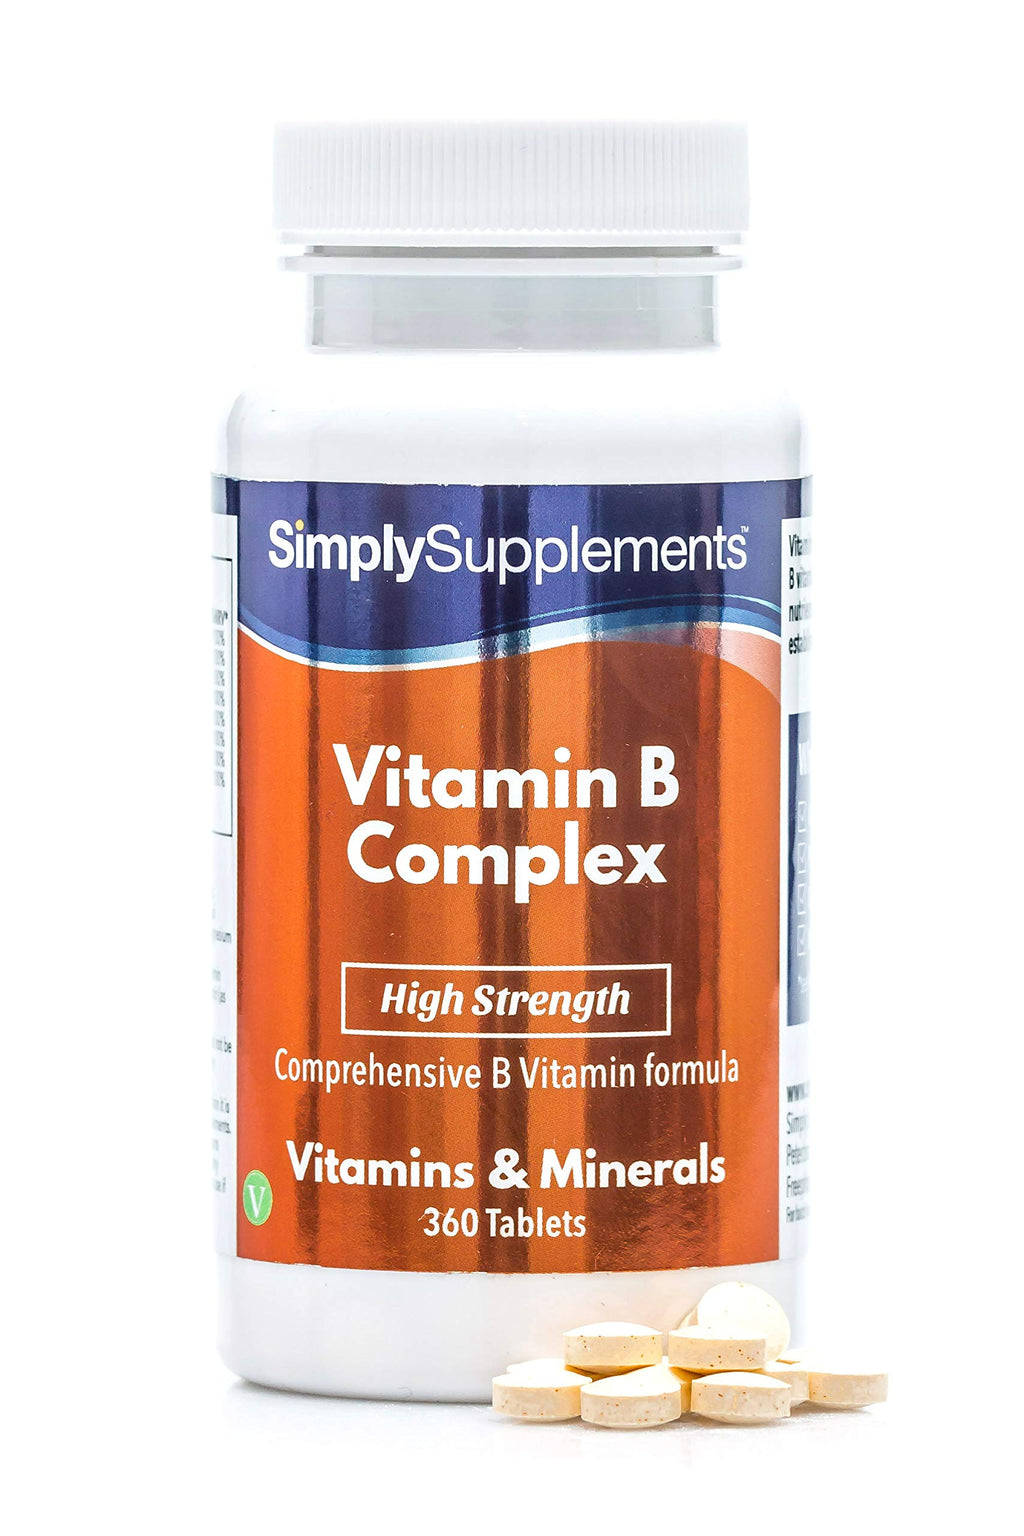 Vitamin B Complex Tablets | High Strength Premium Formulation Includes All 8 B Vitamins, including Biotin & Folic Acid | Vegan & Vegetarian Friendly | Supports Brain Function & Energy Levels | 360 Tablets | Manufactured in the UK - BeesActive Australia